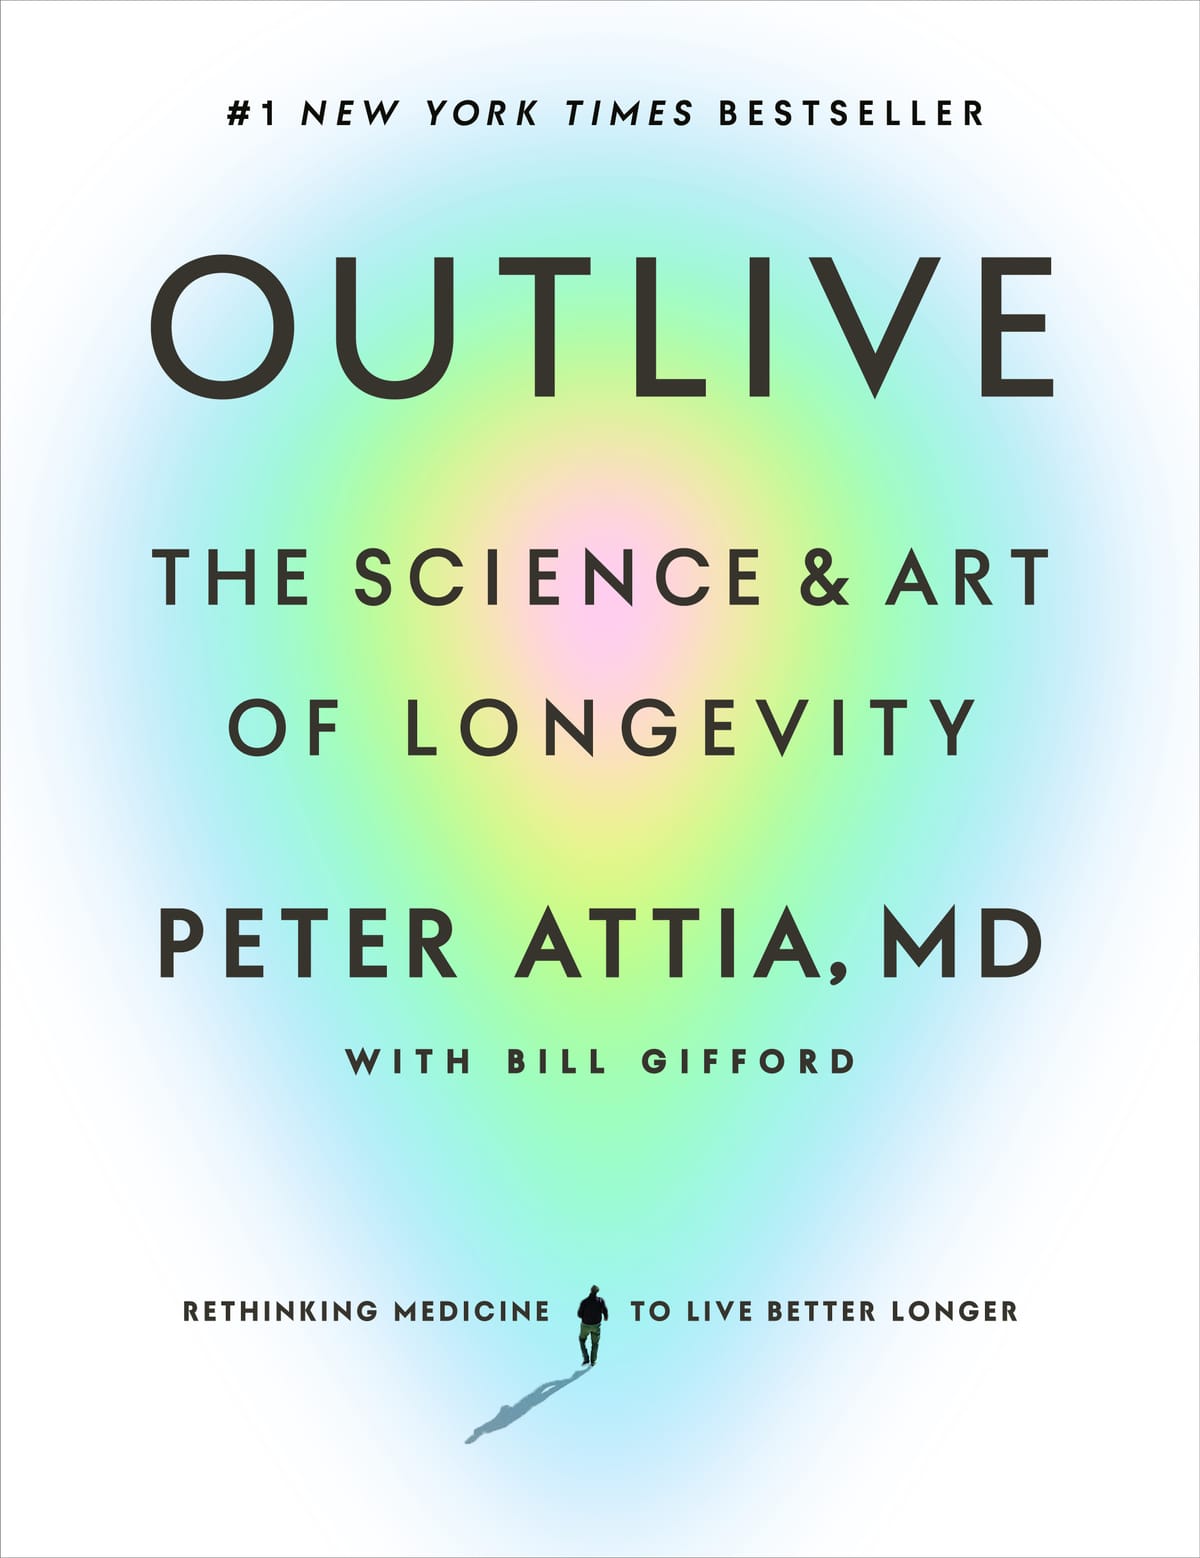 Chapter 2: Outlive: The Science and Art of Longevity